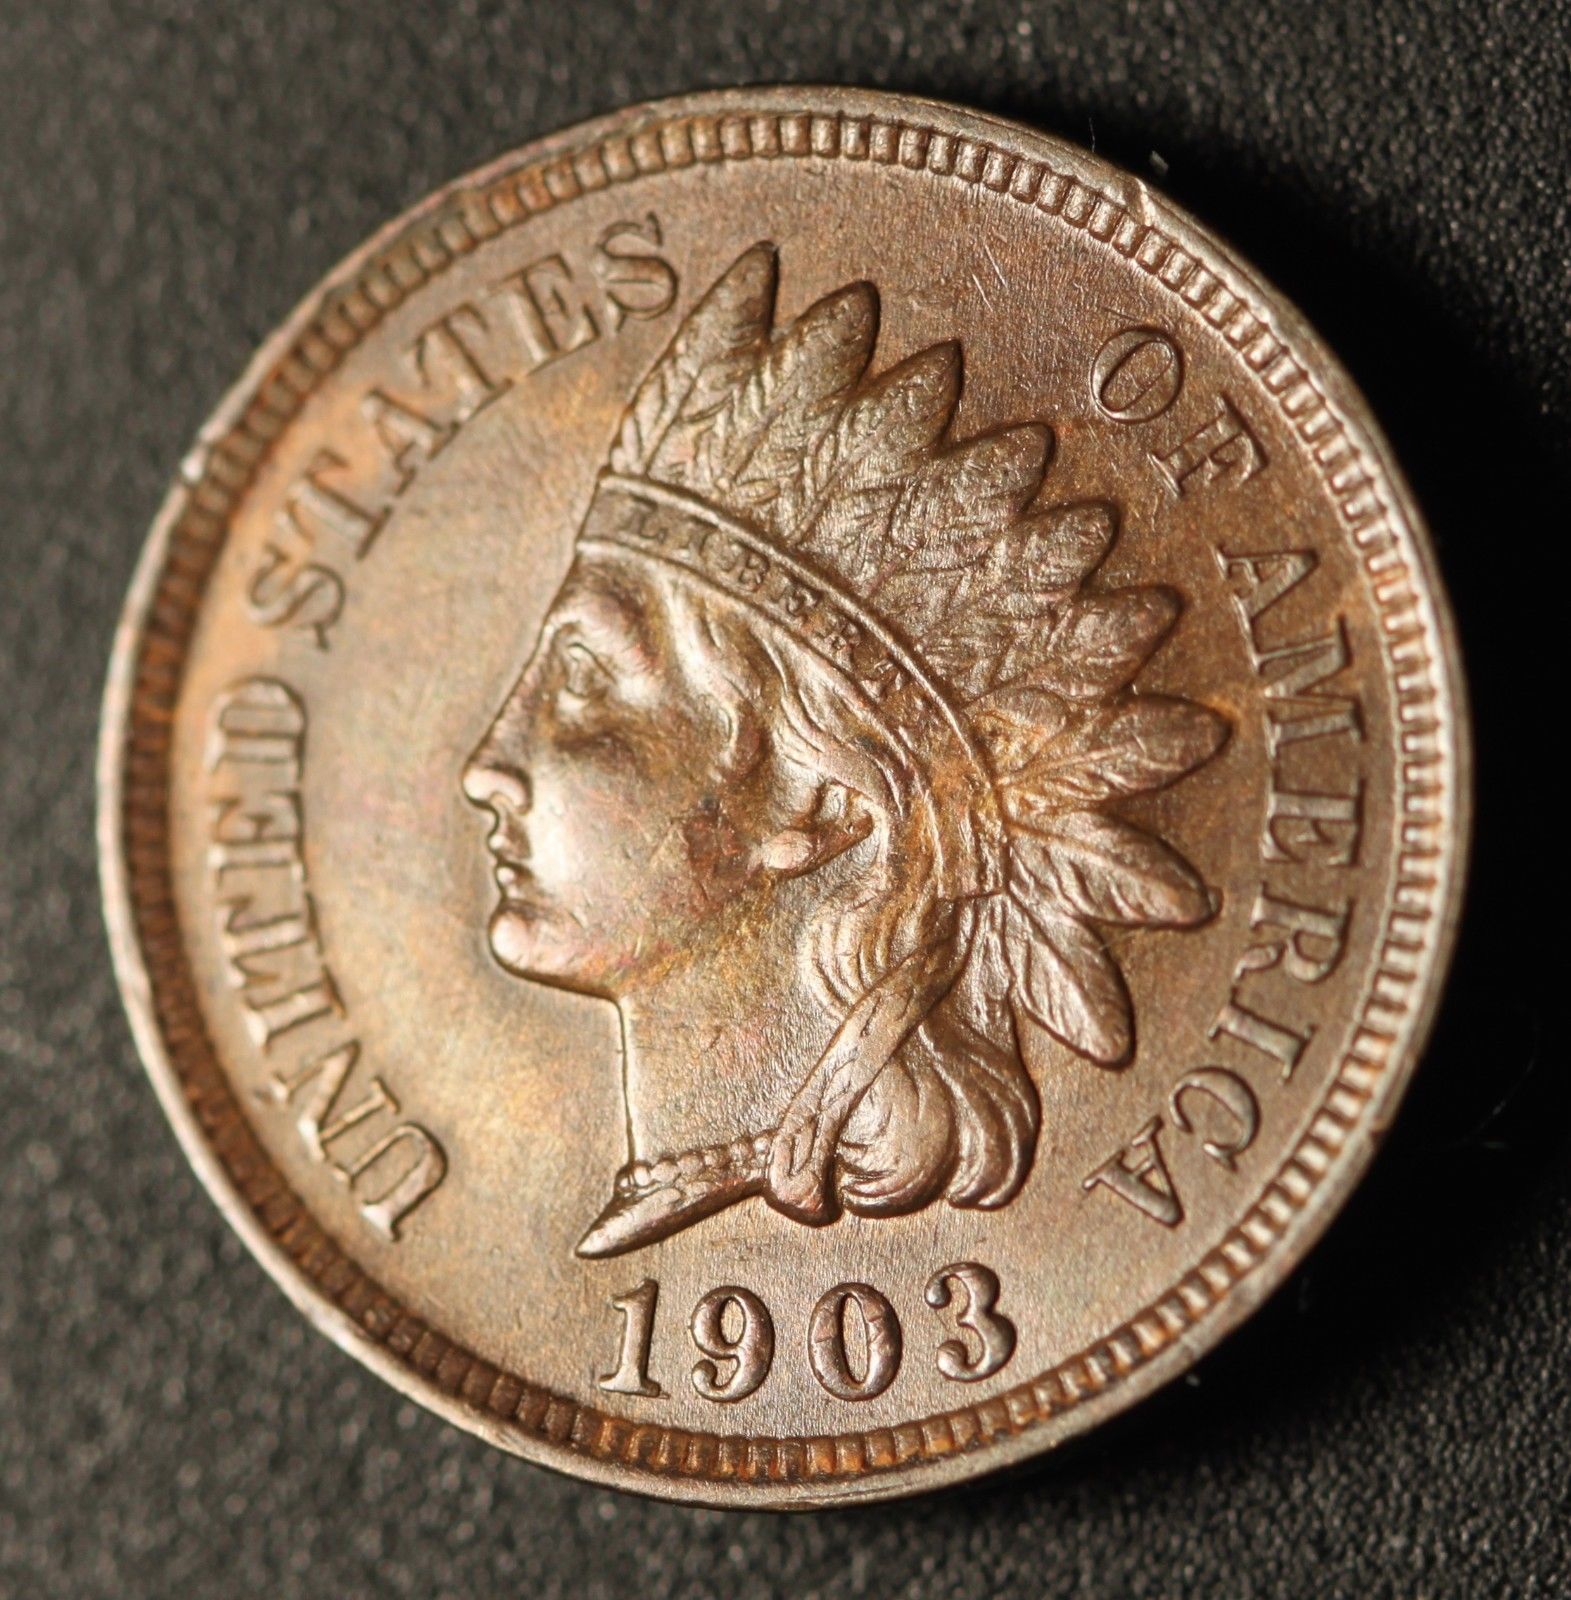 1903 RPD-007 - Indian Head Penny - Photo by Ed Nathanson